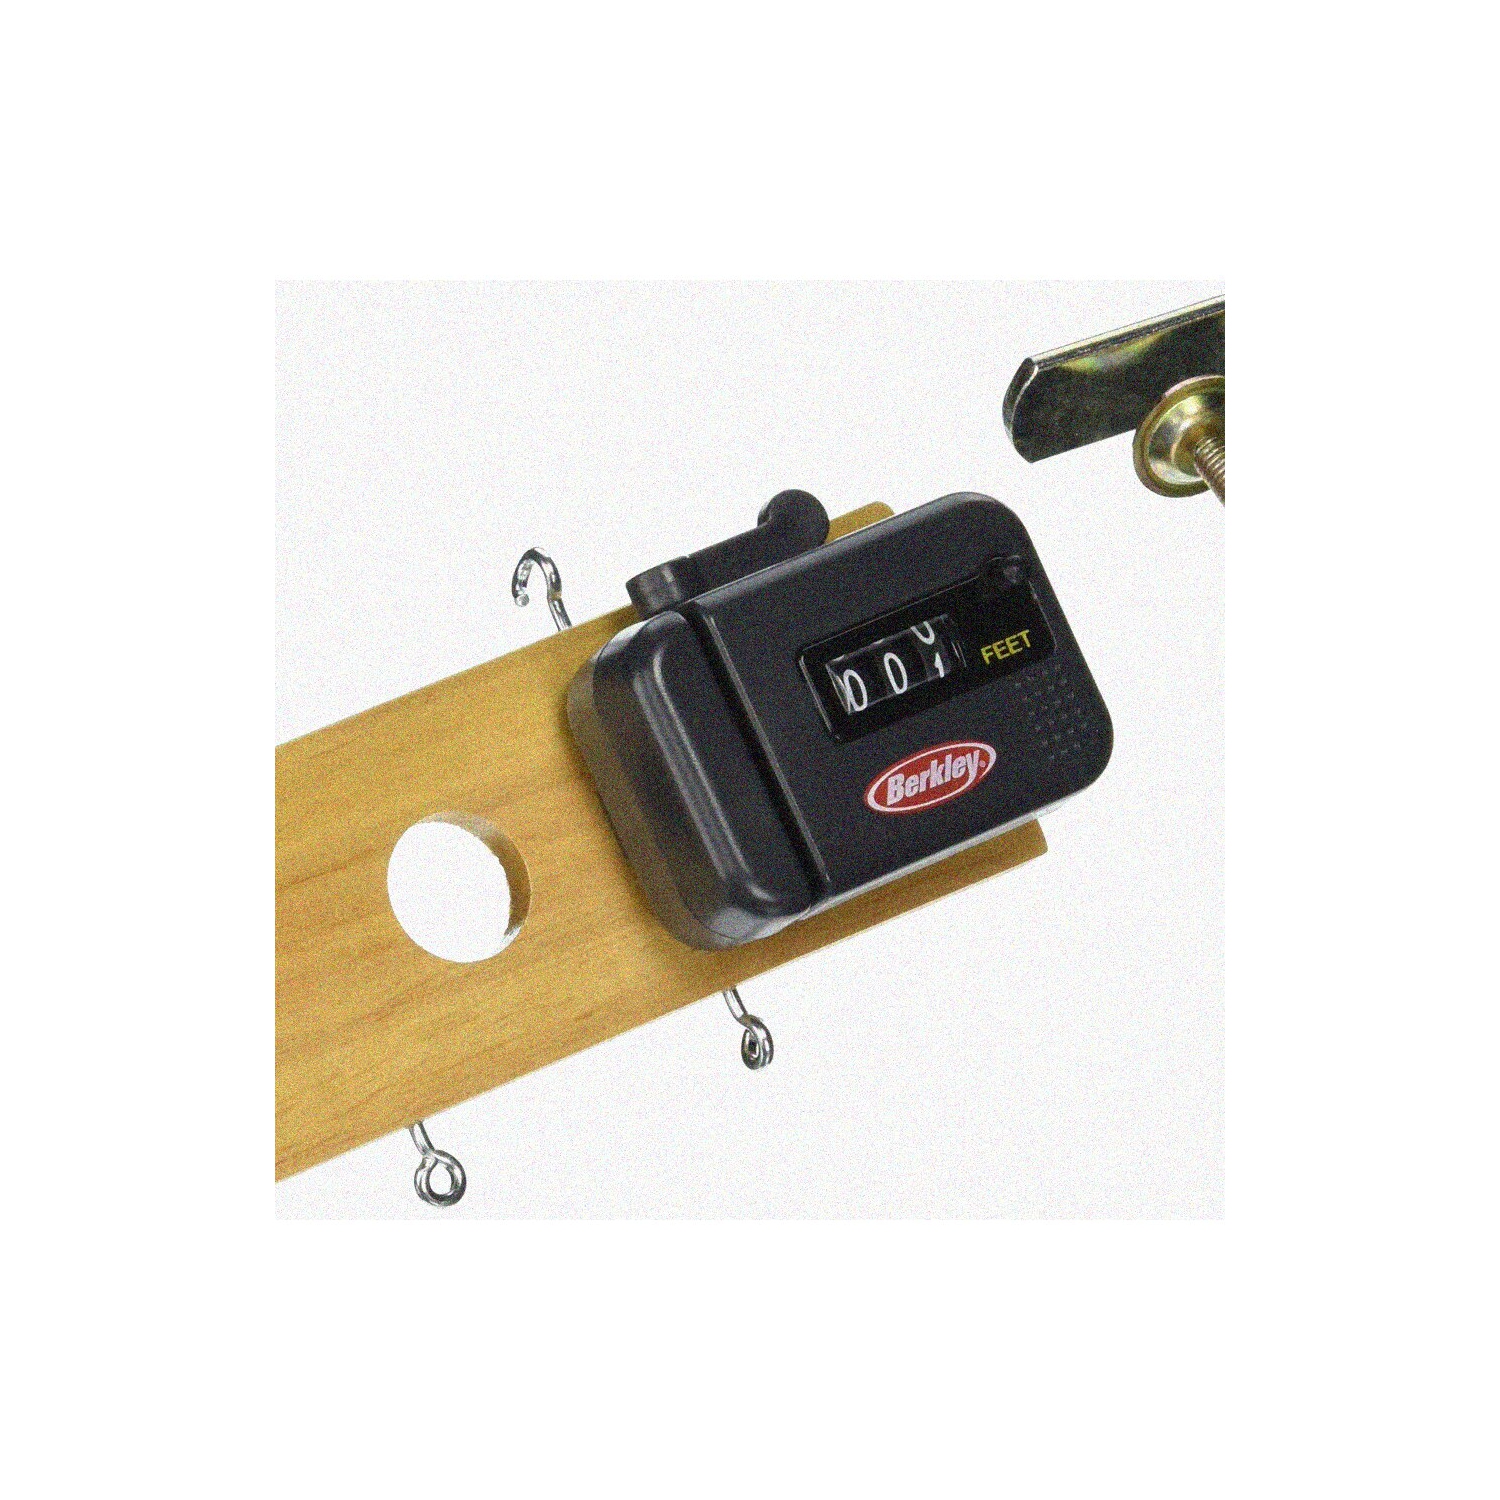 Black Magic Yarn Counter: Innovative Clamp-On Tool for Accurate Yarn Measurement & Tracking